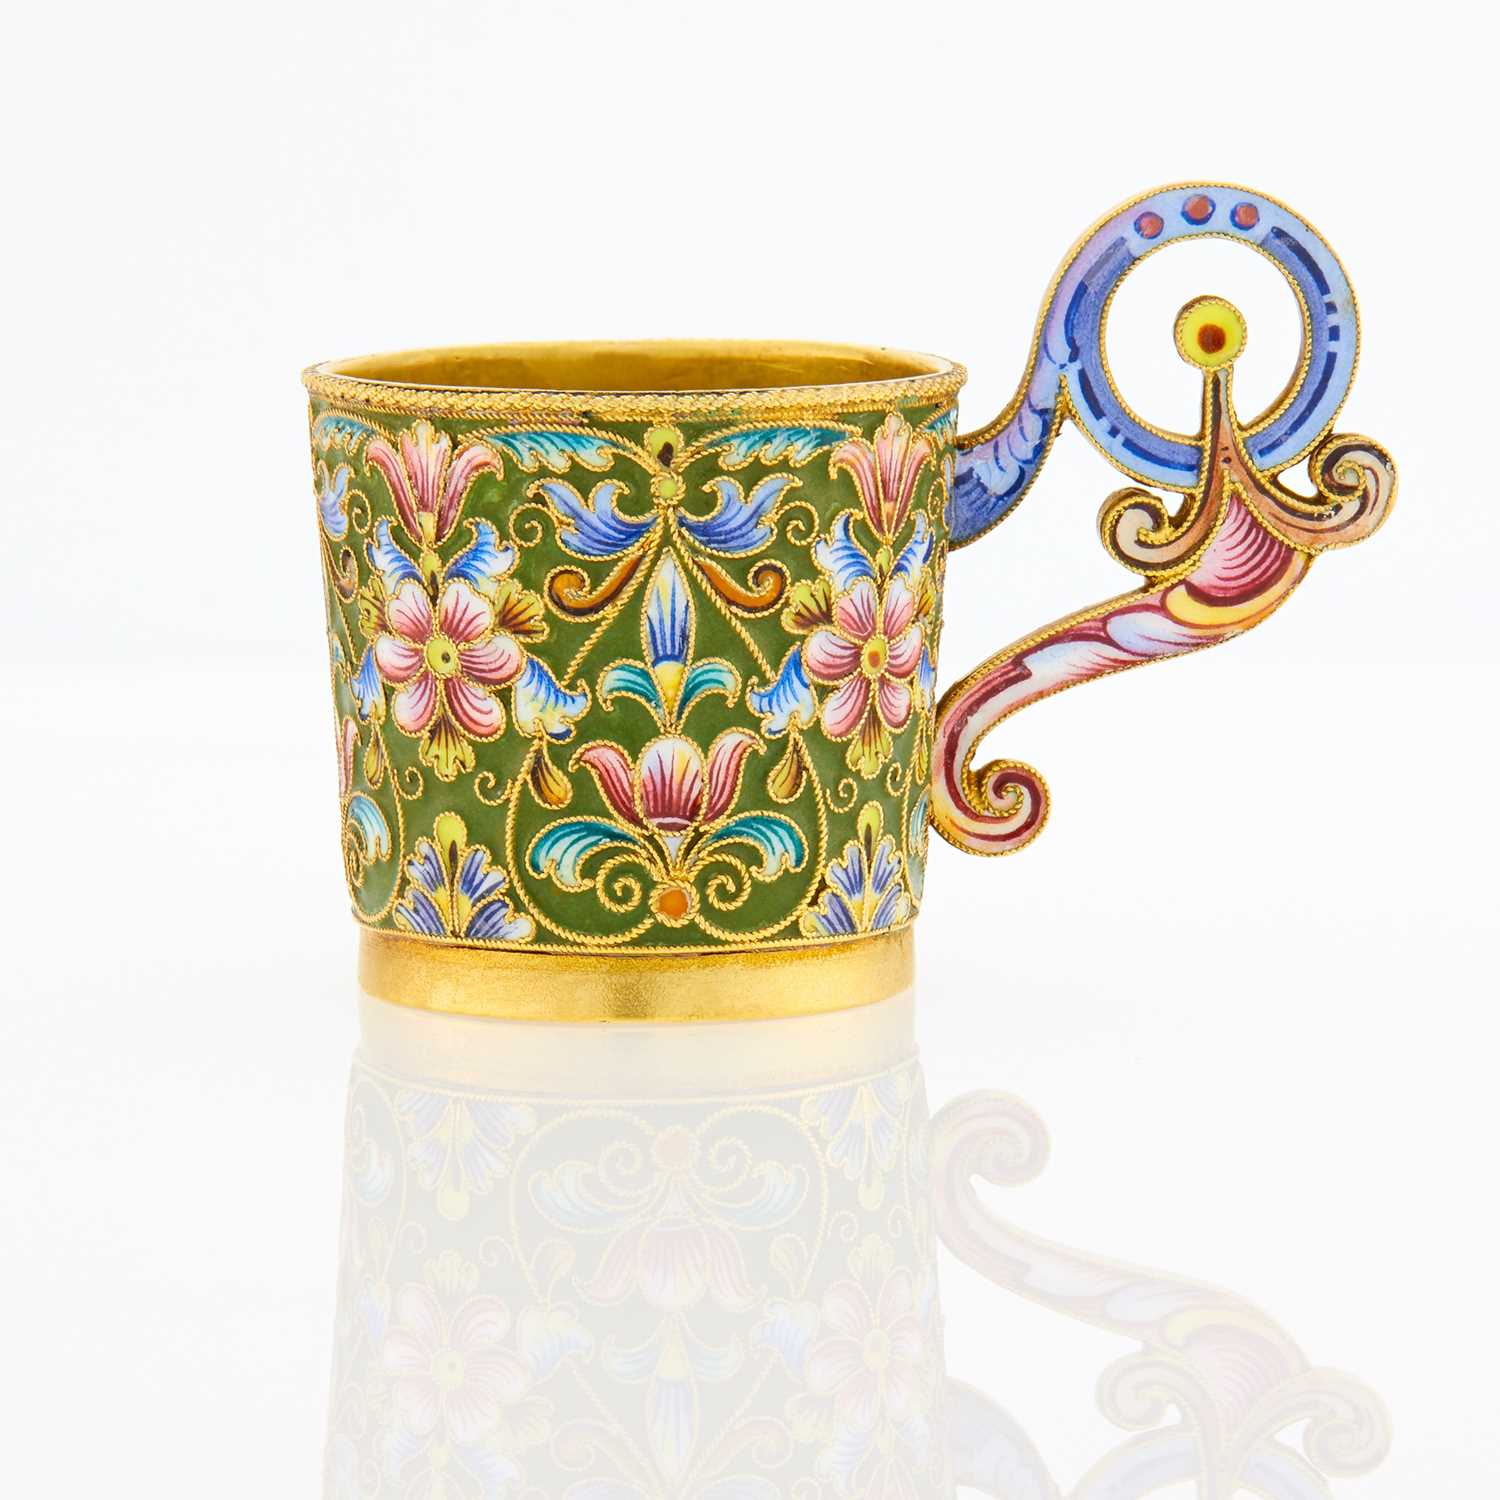 Lot 697 - Russian Silver-Gilt and Cloisonné Enamel Handled Cup